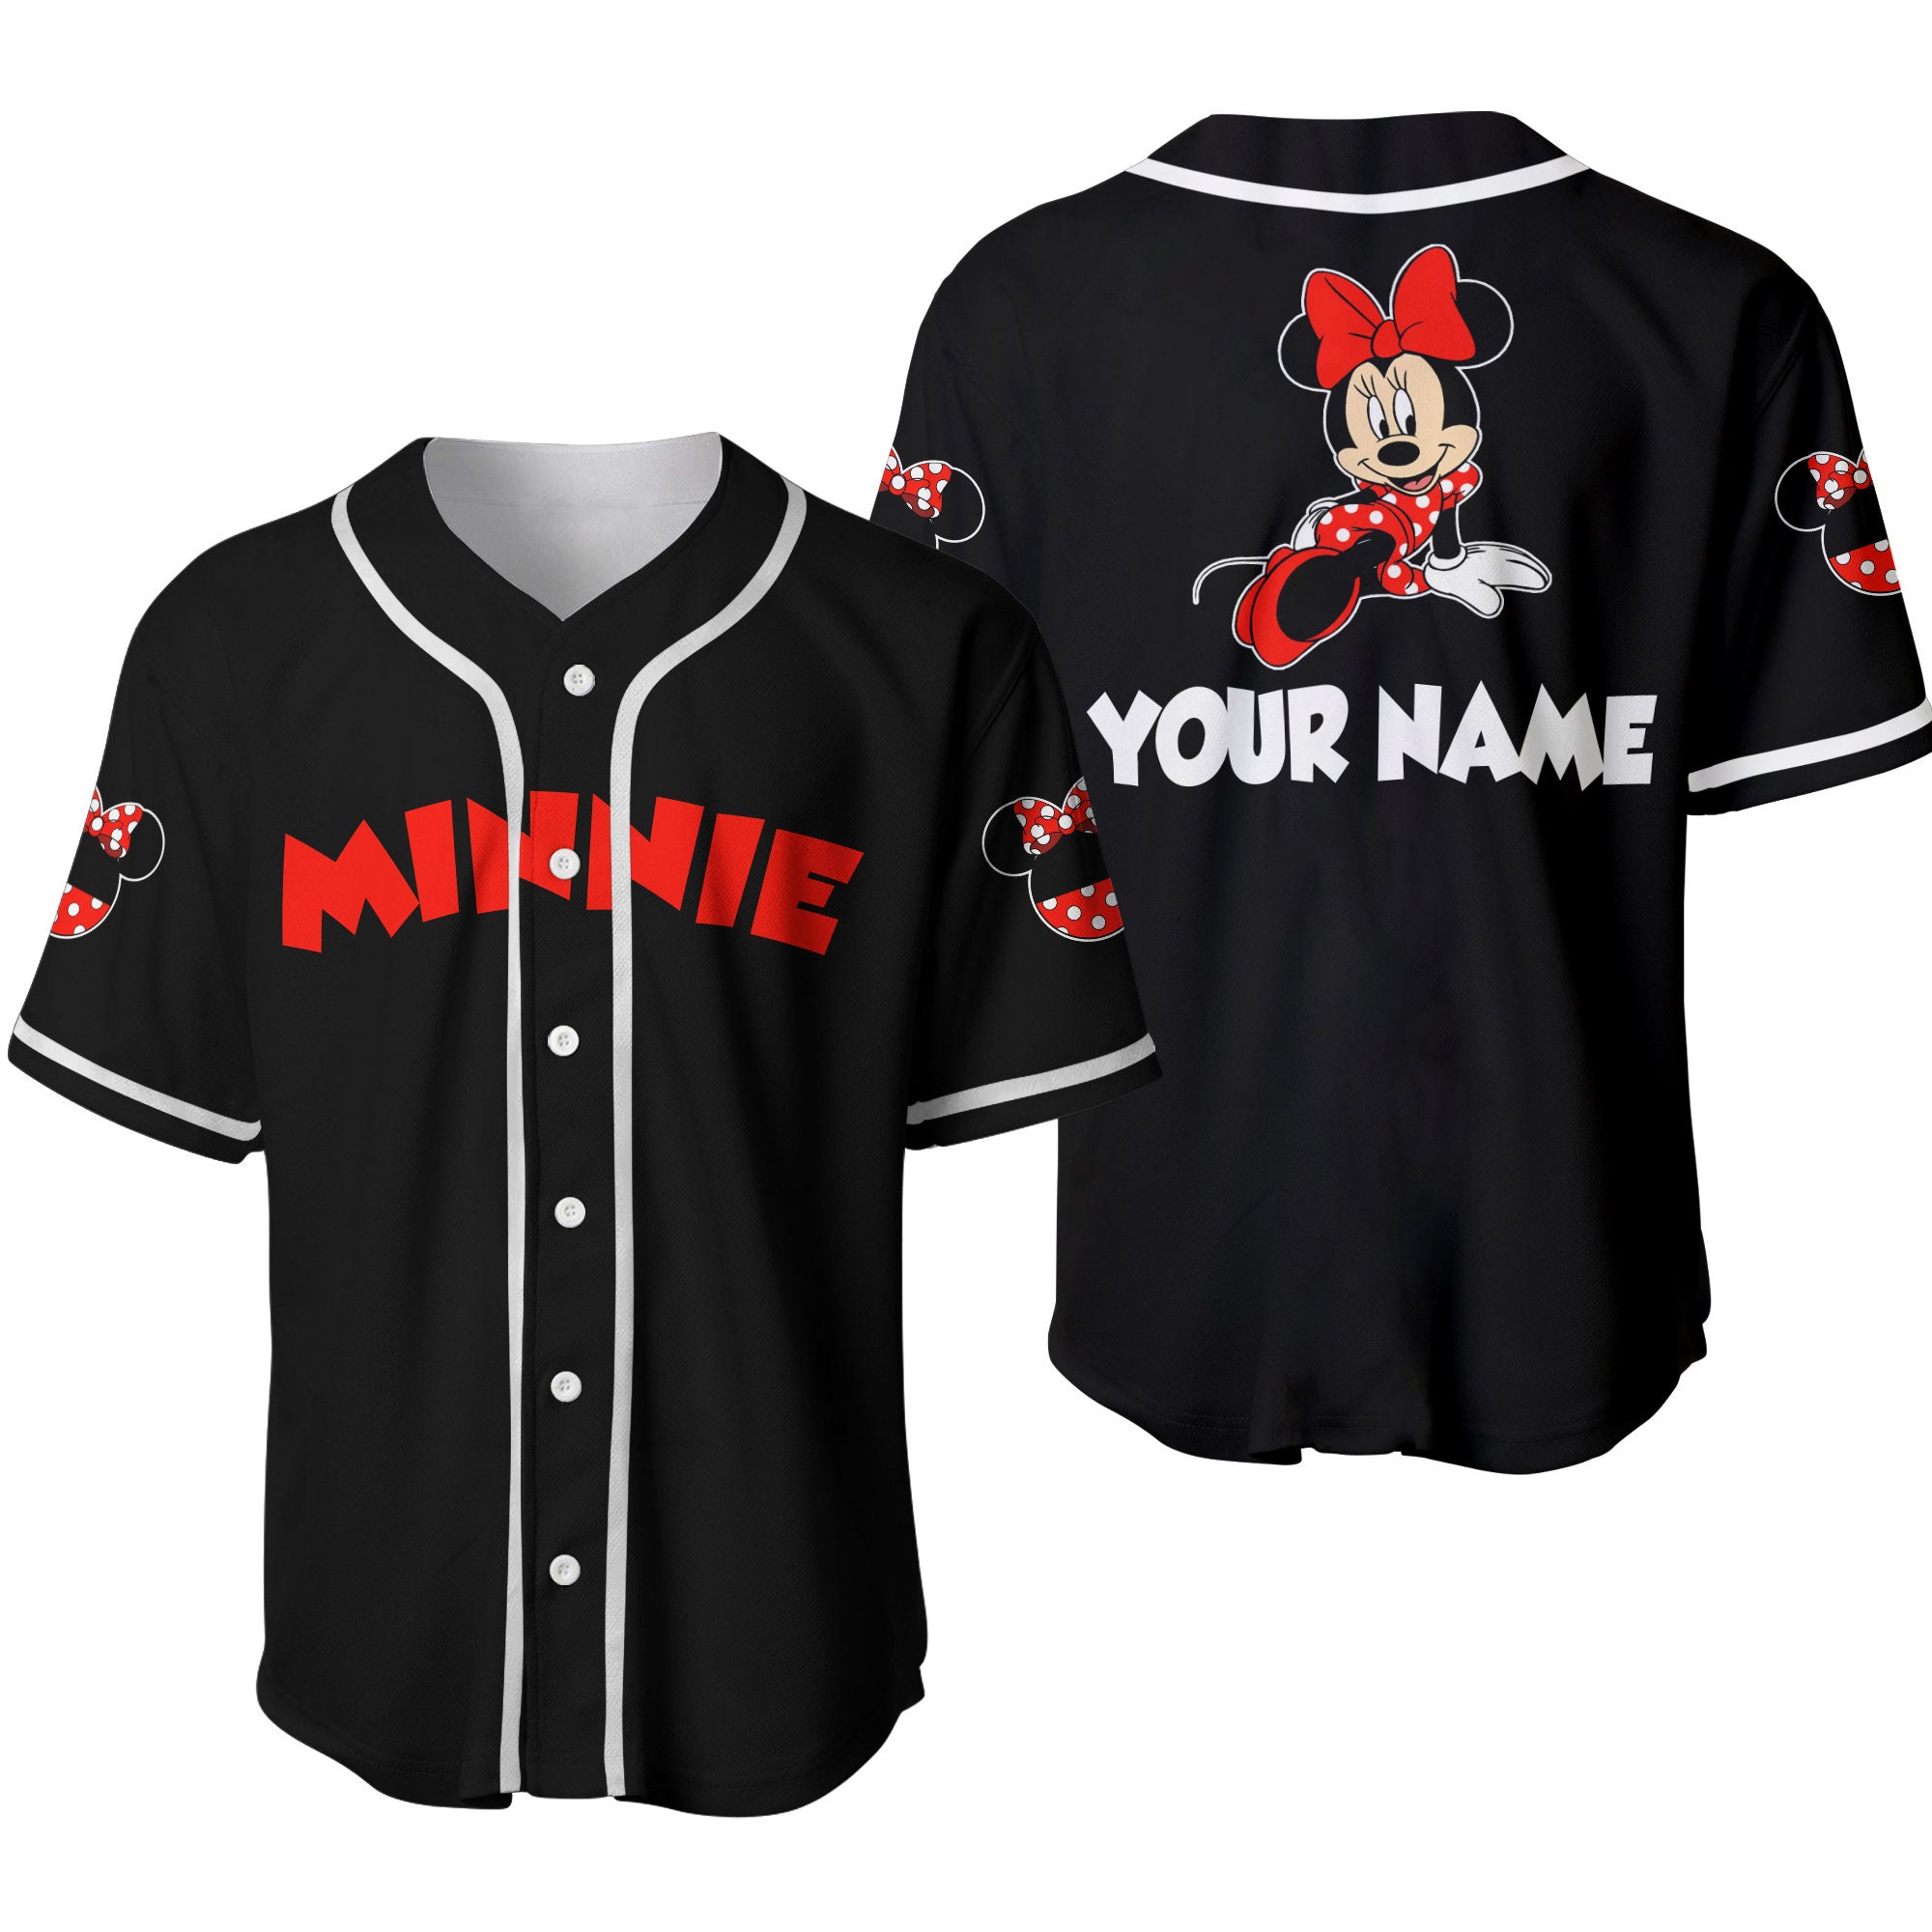 Discover Chilling Minnie Mouse Black,Custom Baseball Jersey Personalized Shirt